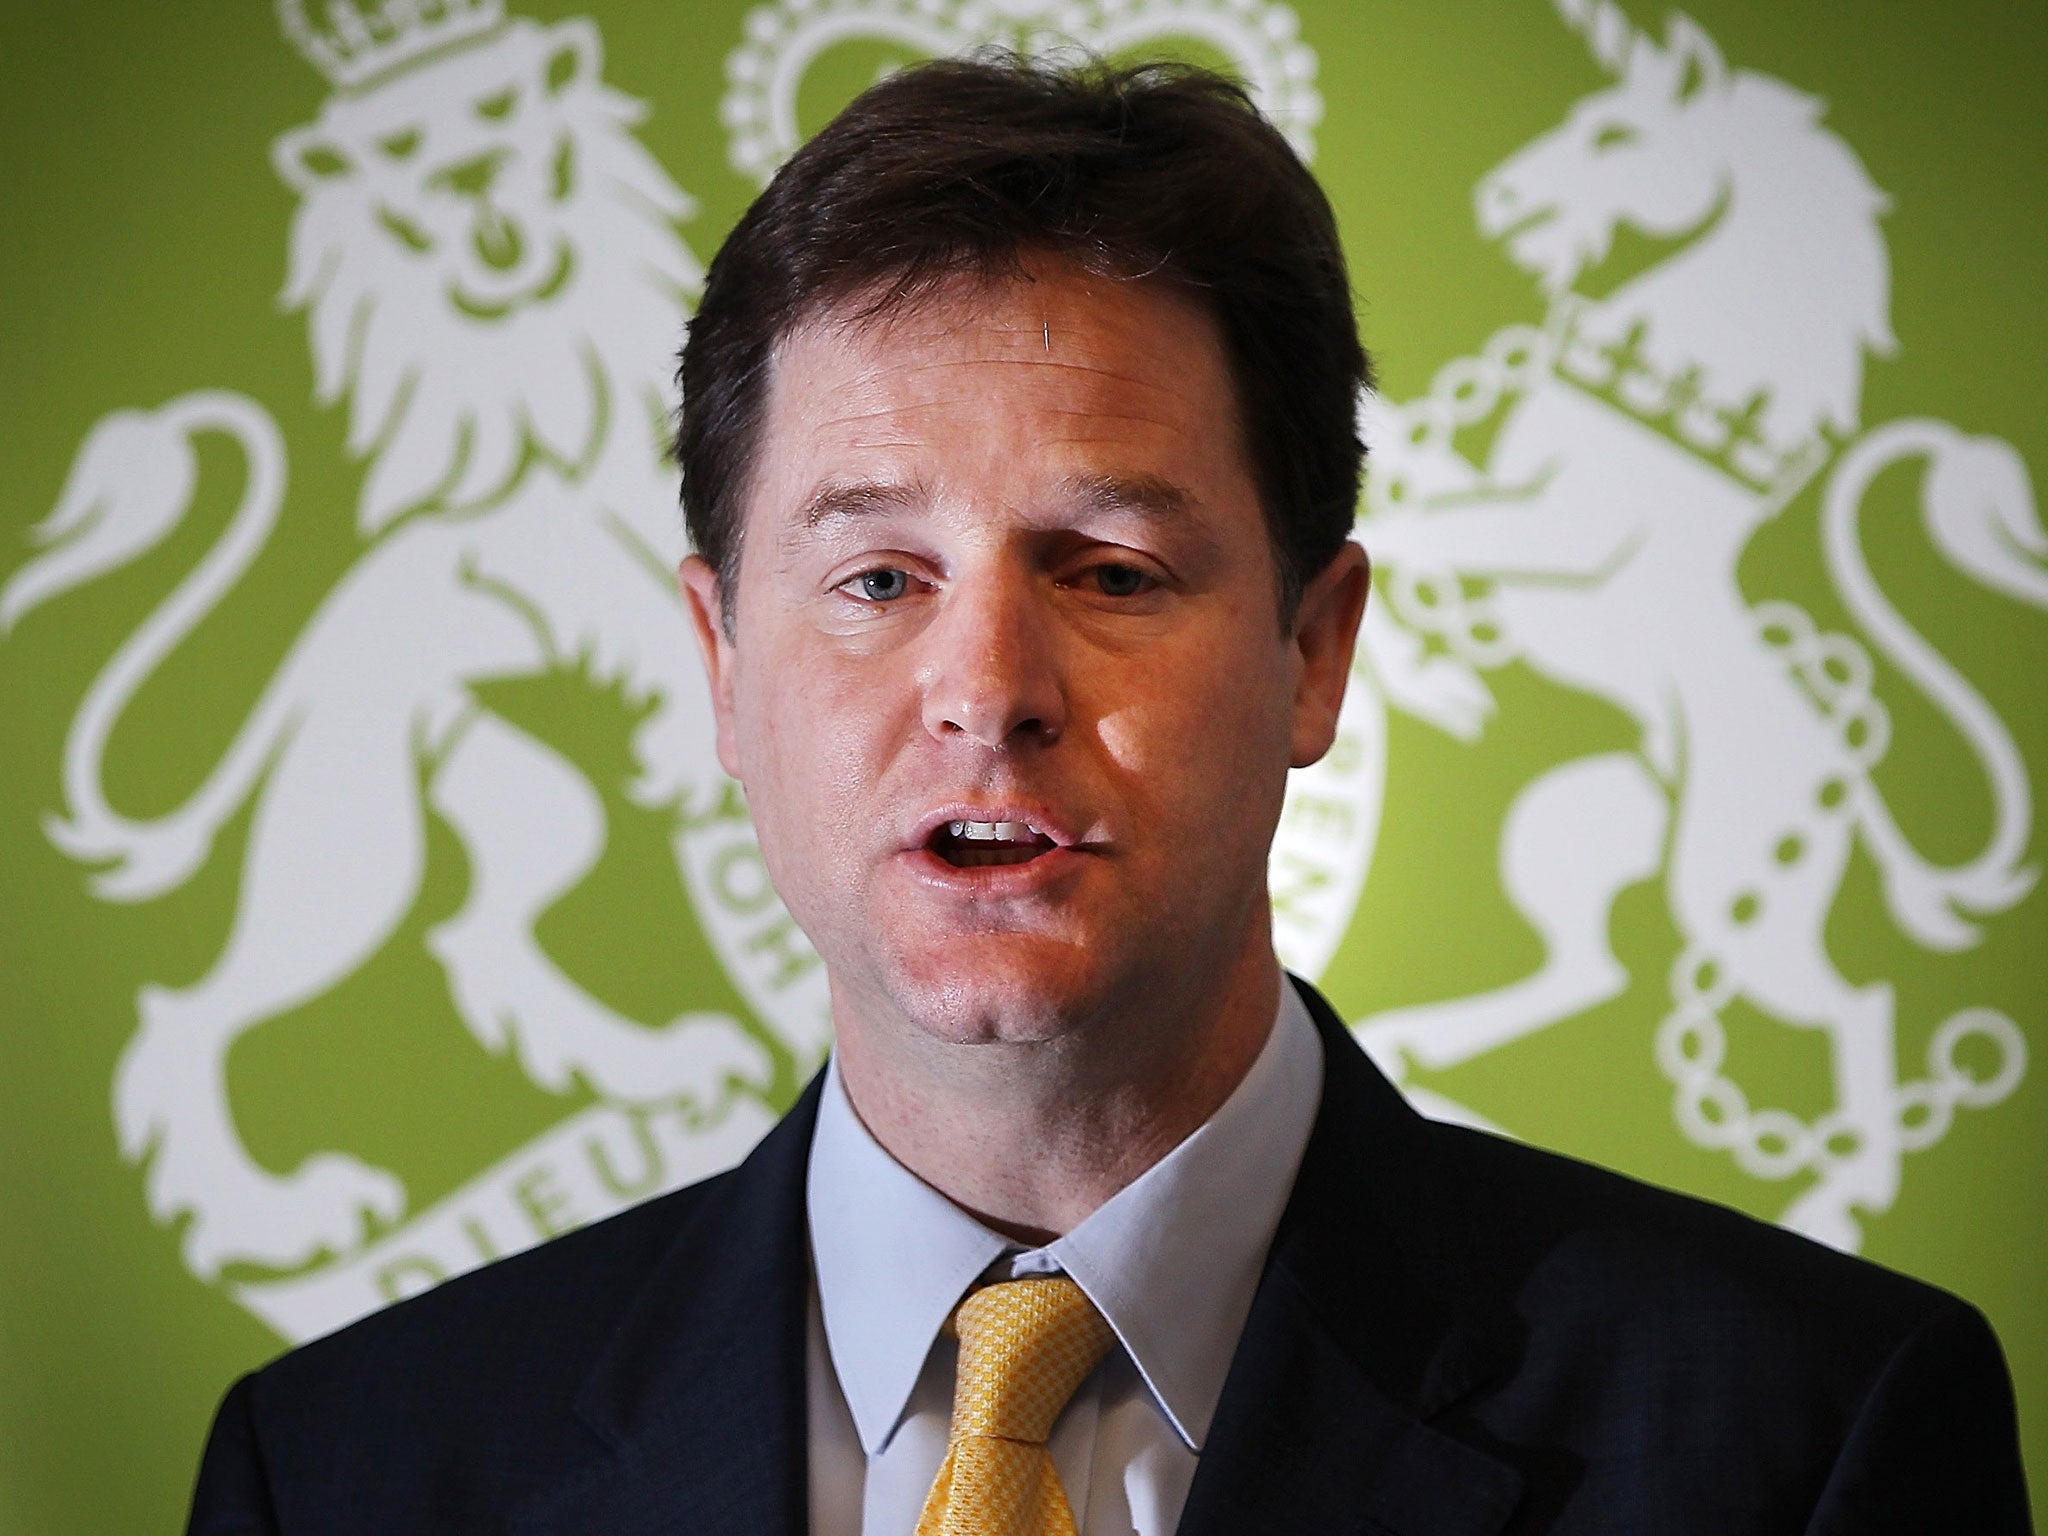 Norman Baker privately told Nick Clegg two months earlier that he wanted to step down from the Government after more than four years